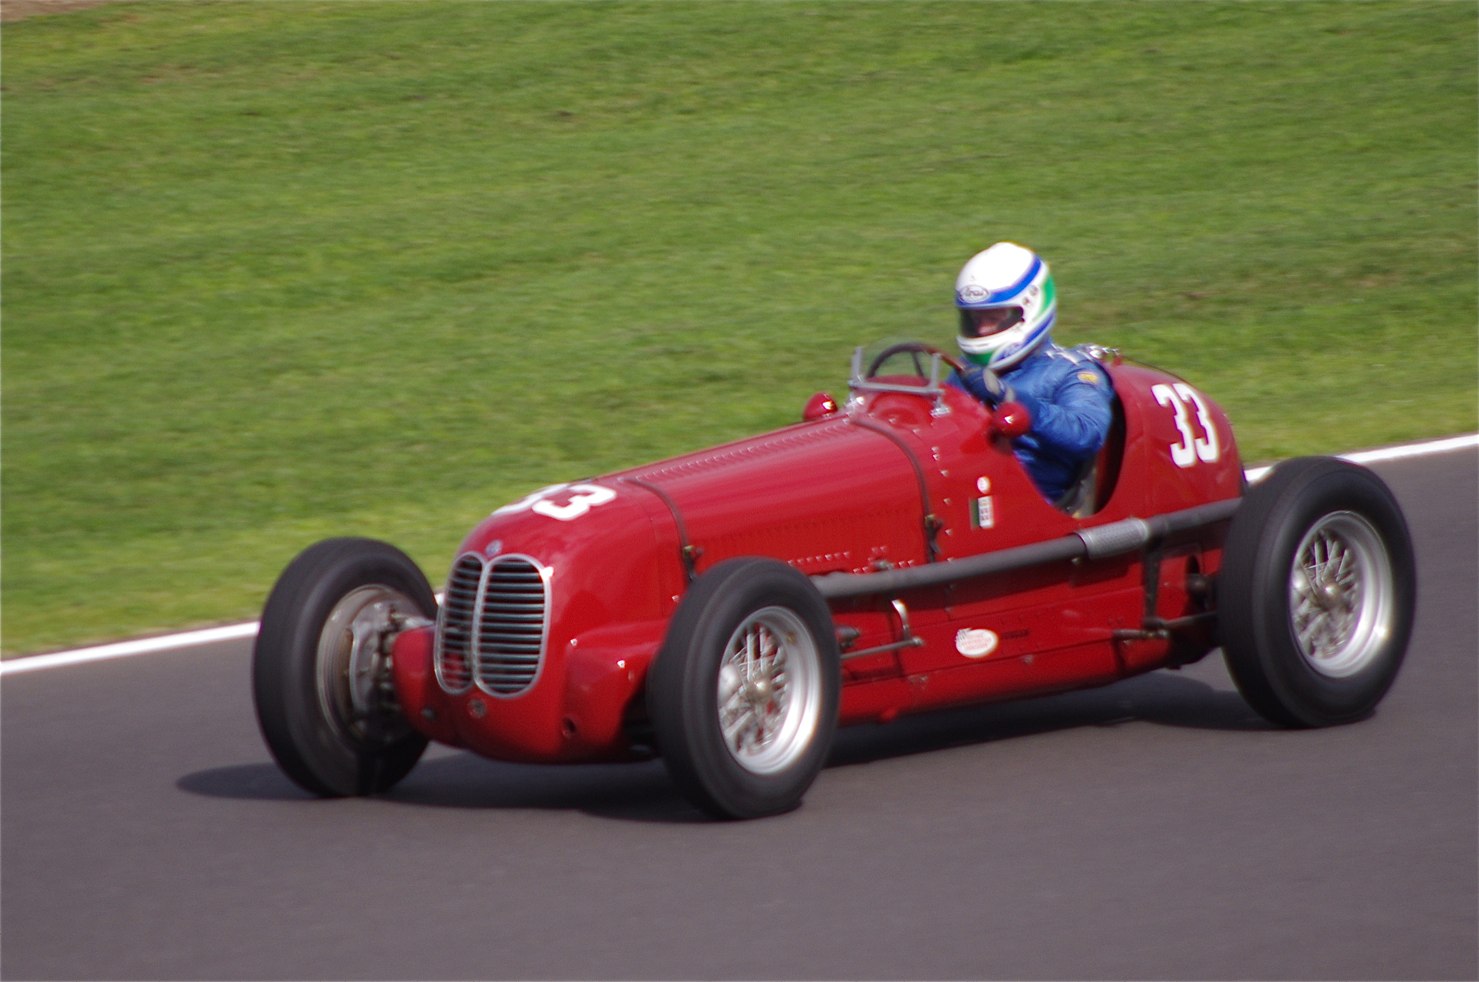 a red race car on the road with a person driving it